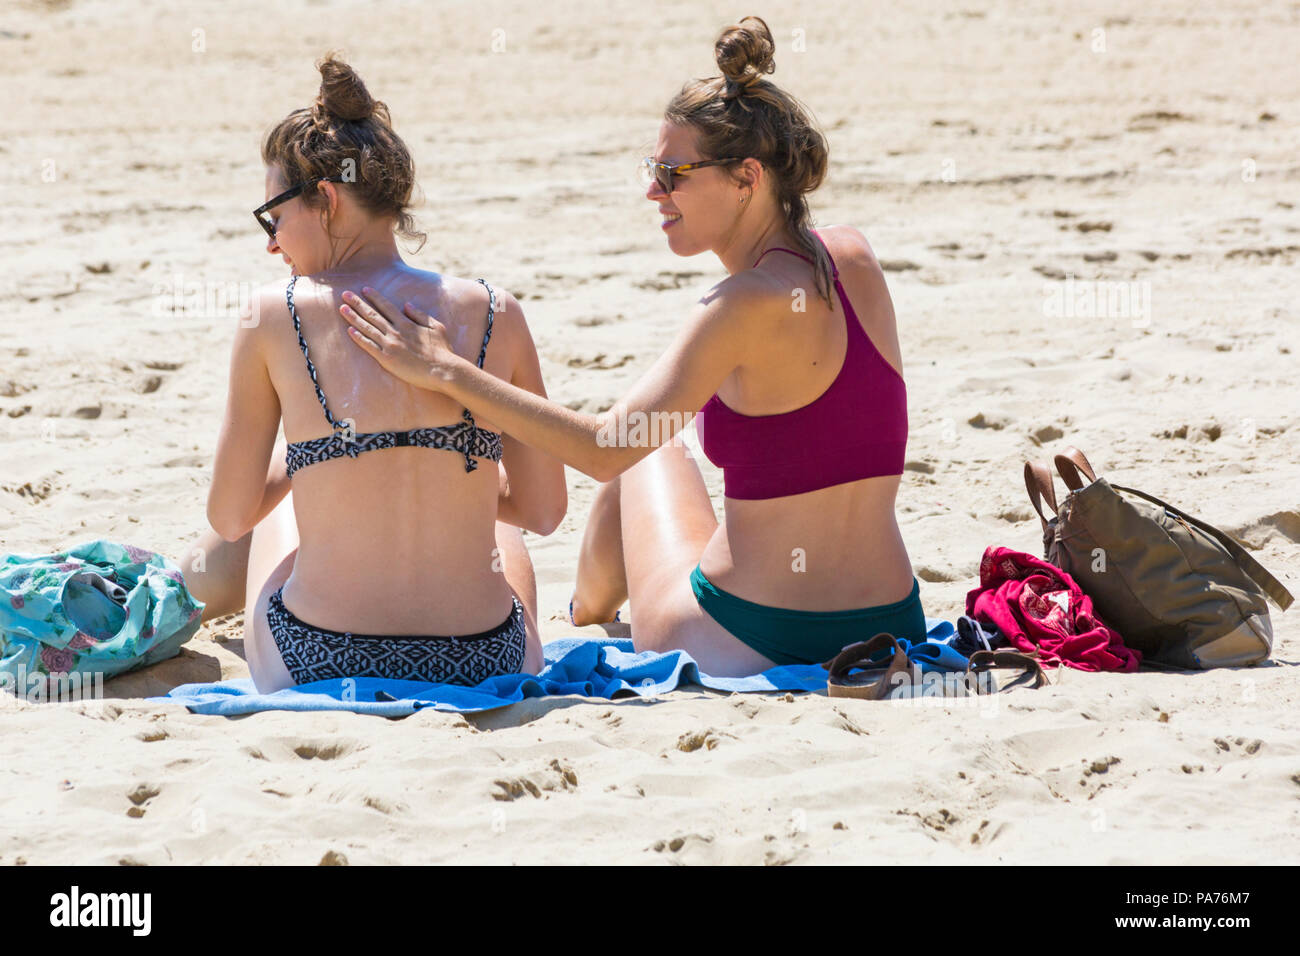 Bournemouth, Dorset, UK. 21st July 2018. UK weather: hot and sunny at Bournemouth beaches, as sunseekers head to the seaside to soak up the sun at the start of the summer holidays. Time to rub more suntan lotion cream in! Two young women sunbathing on the beach. Credit: Carolyn Jenkins/Alamy Live News Stock Photo